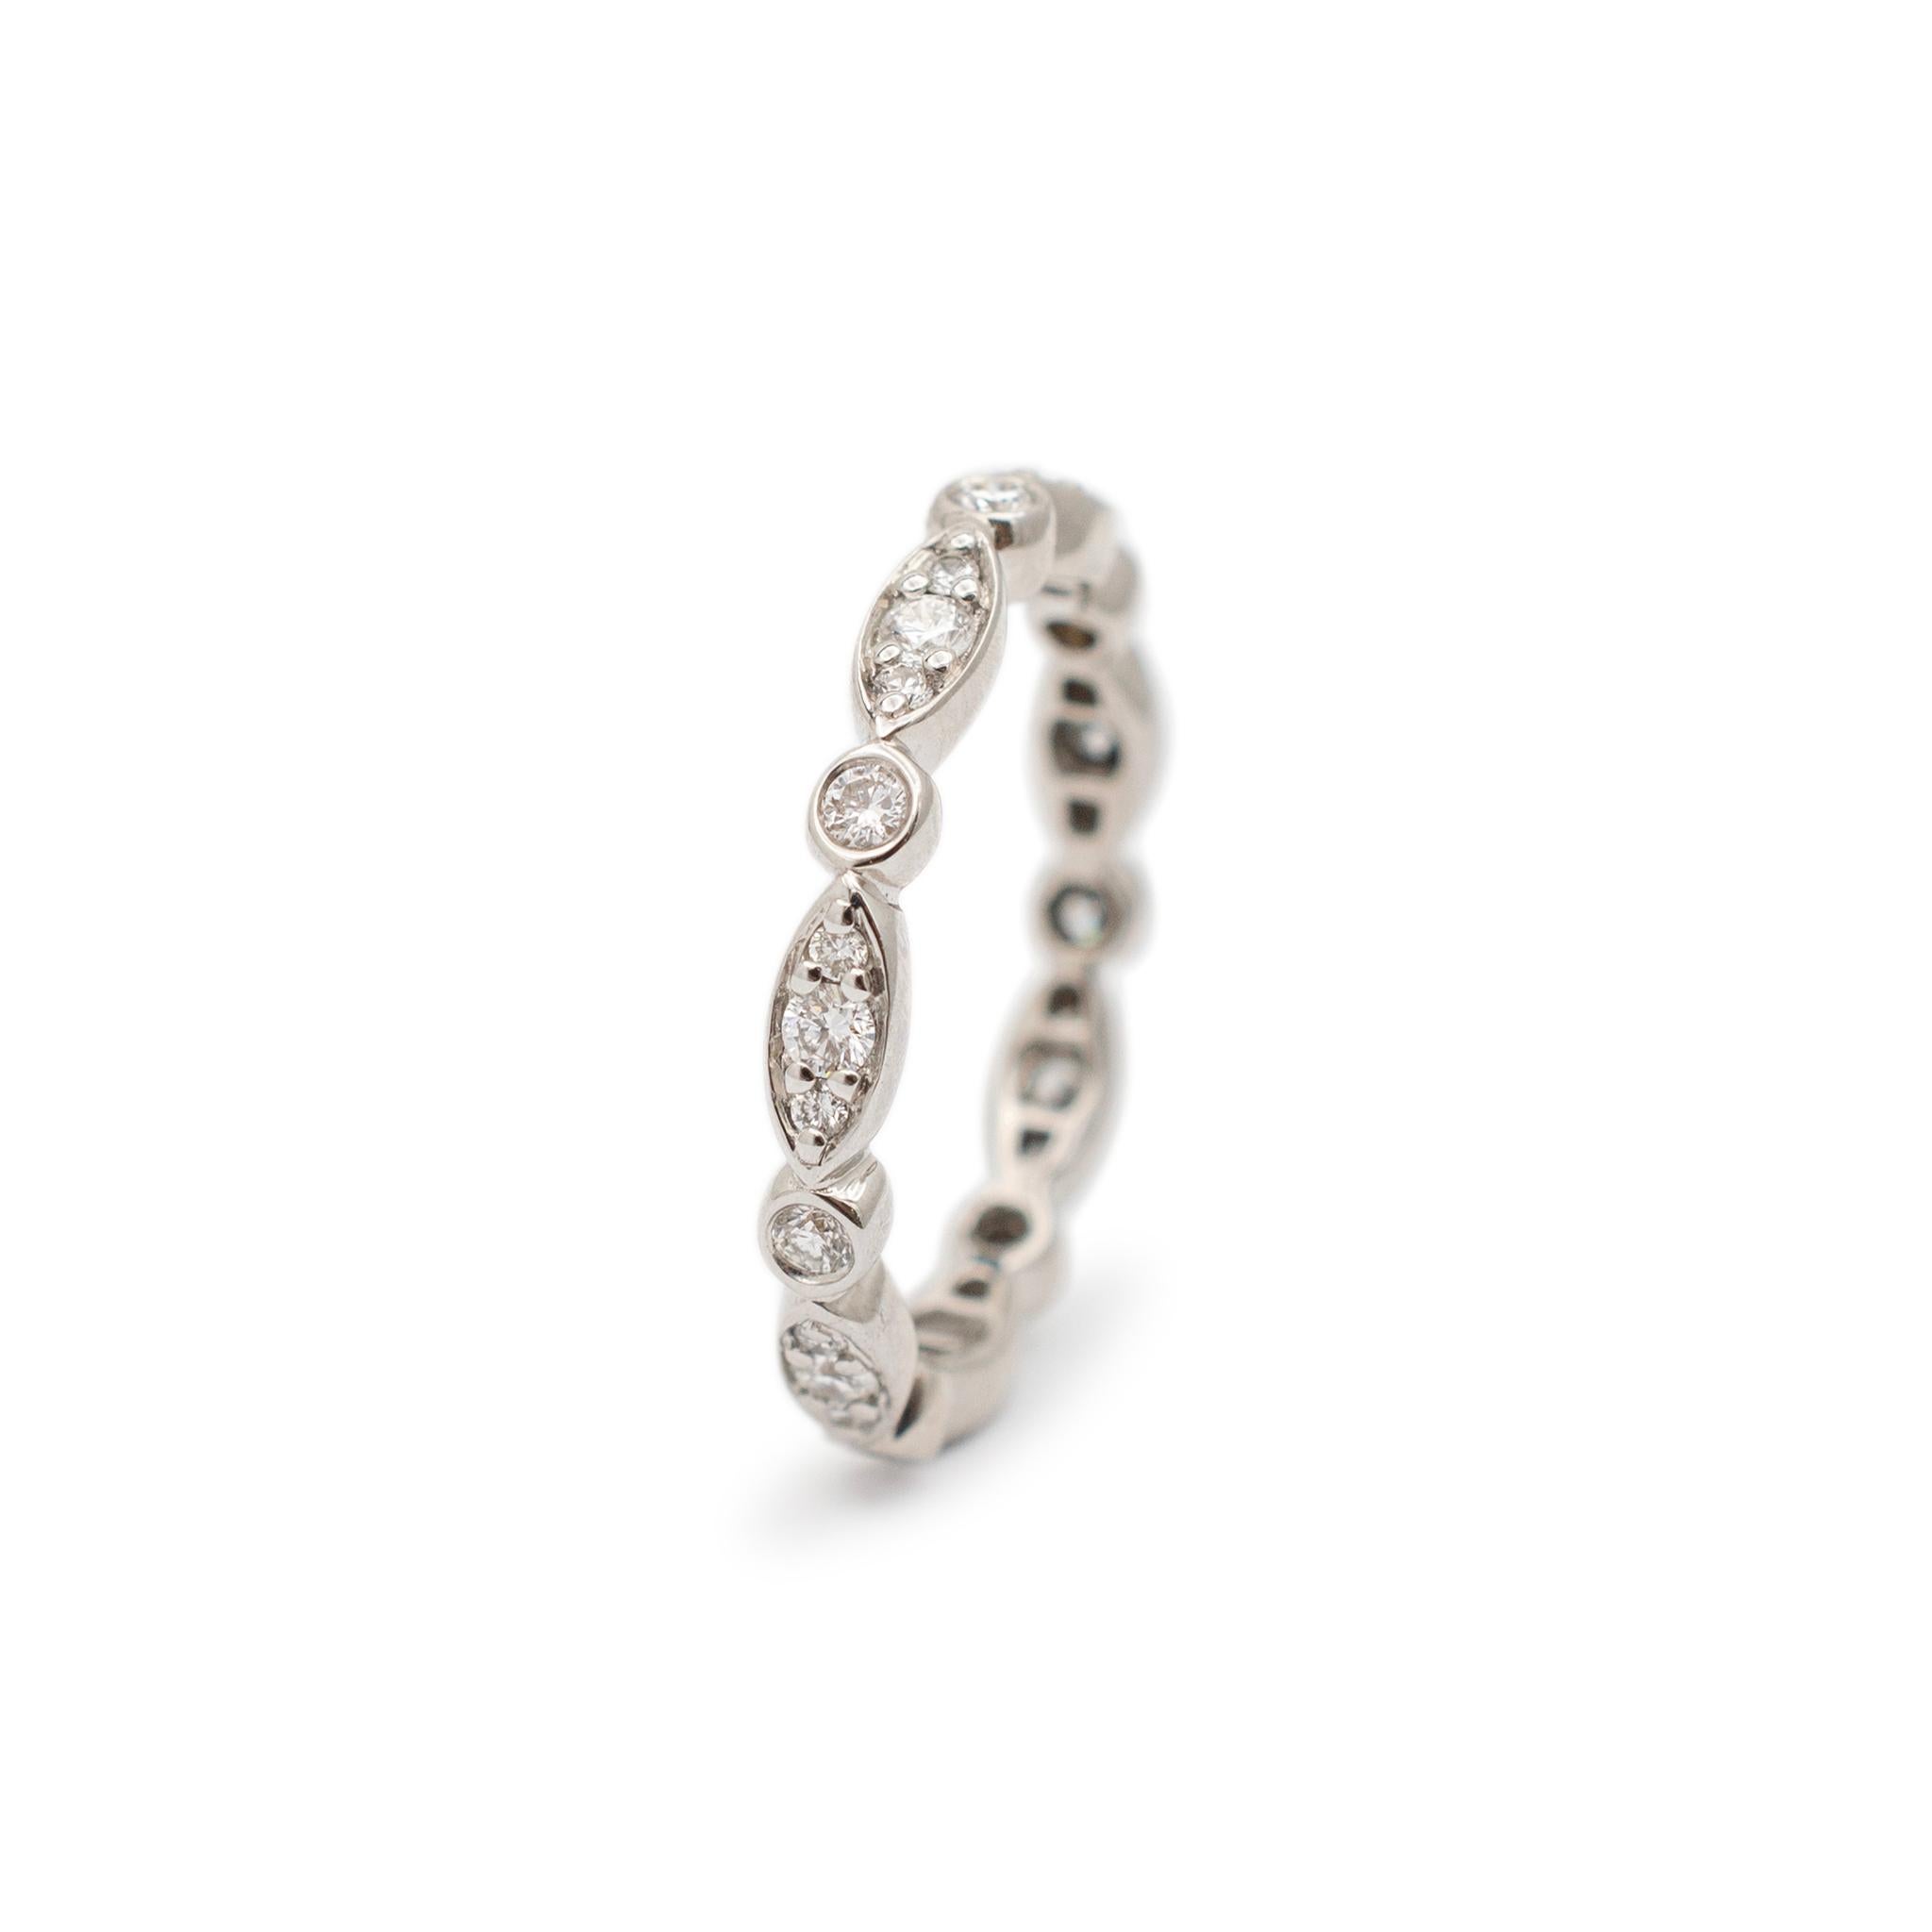 Gender: Ladies

Metal Type: 18K White Gold

Size: 6.5

Shank Width: 3.00mm

Weight: 2.90 grams

Ladies 18K white gold diamond wedding eternity band with a half-round shank. Engraved with 